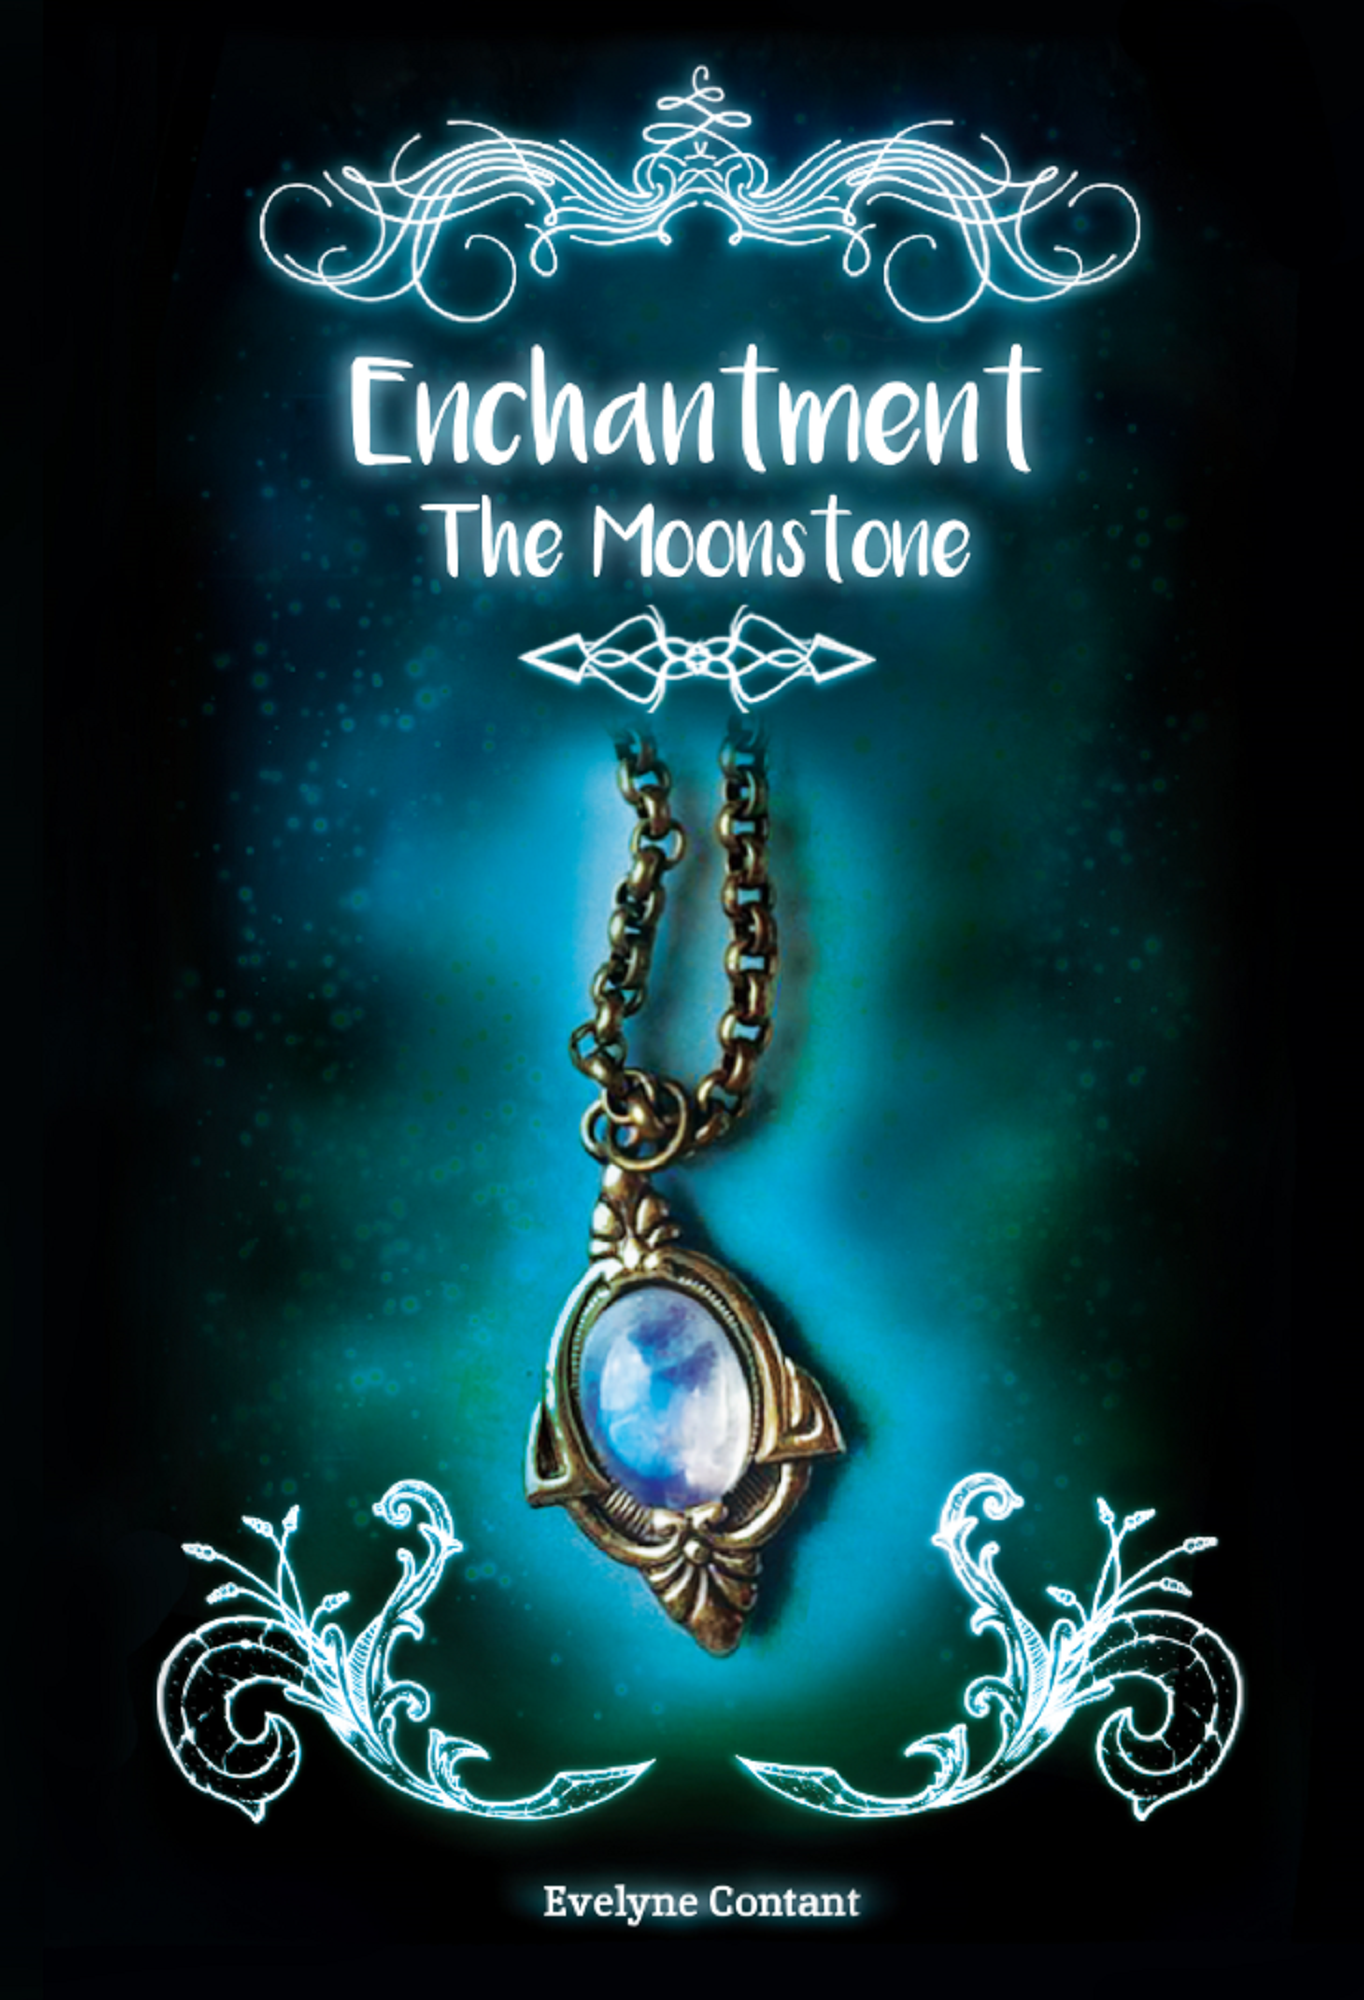 FREE: The Moonstone, Enchantment book 1 by evelyne contant